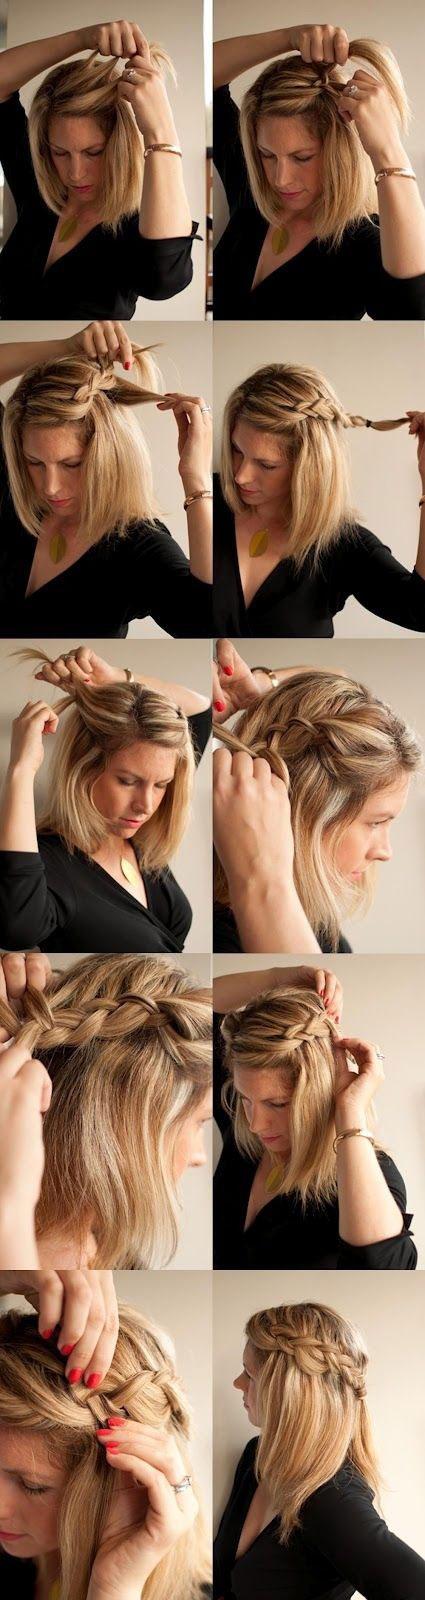 Easy hairstyles f easy-hairstyles-f-11_11